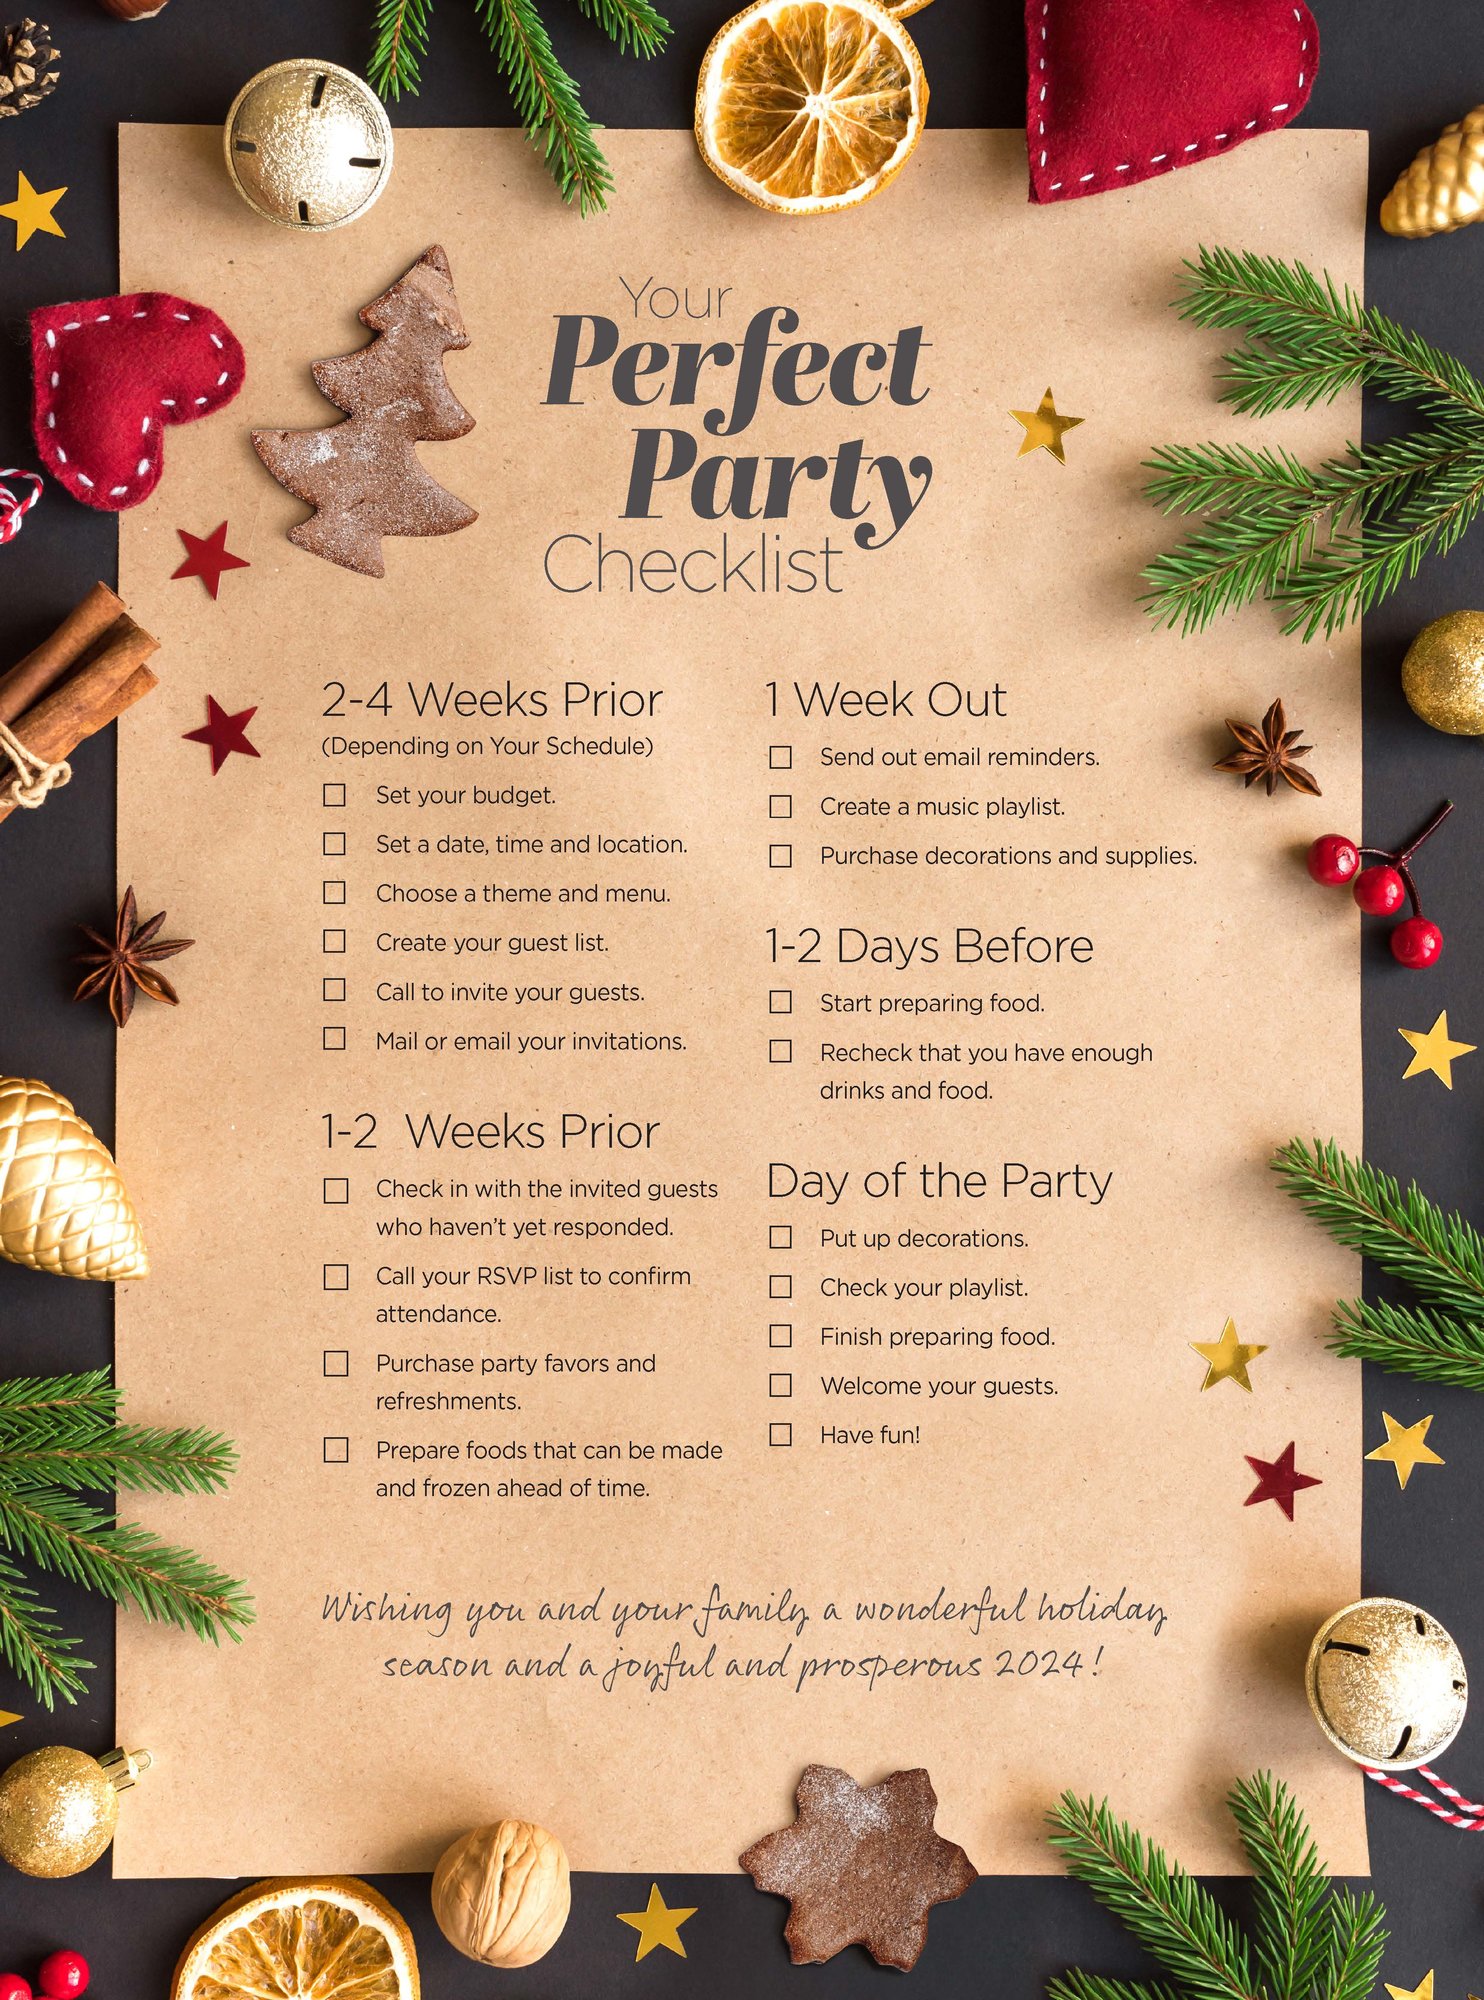 Your perfect party checklist